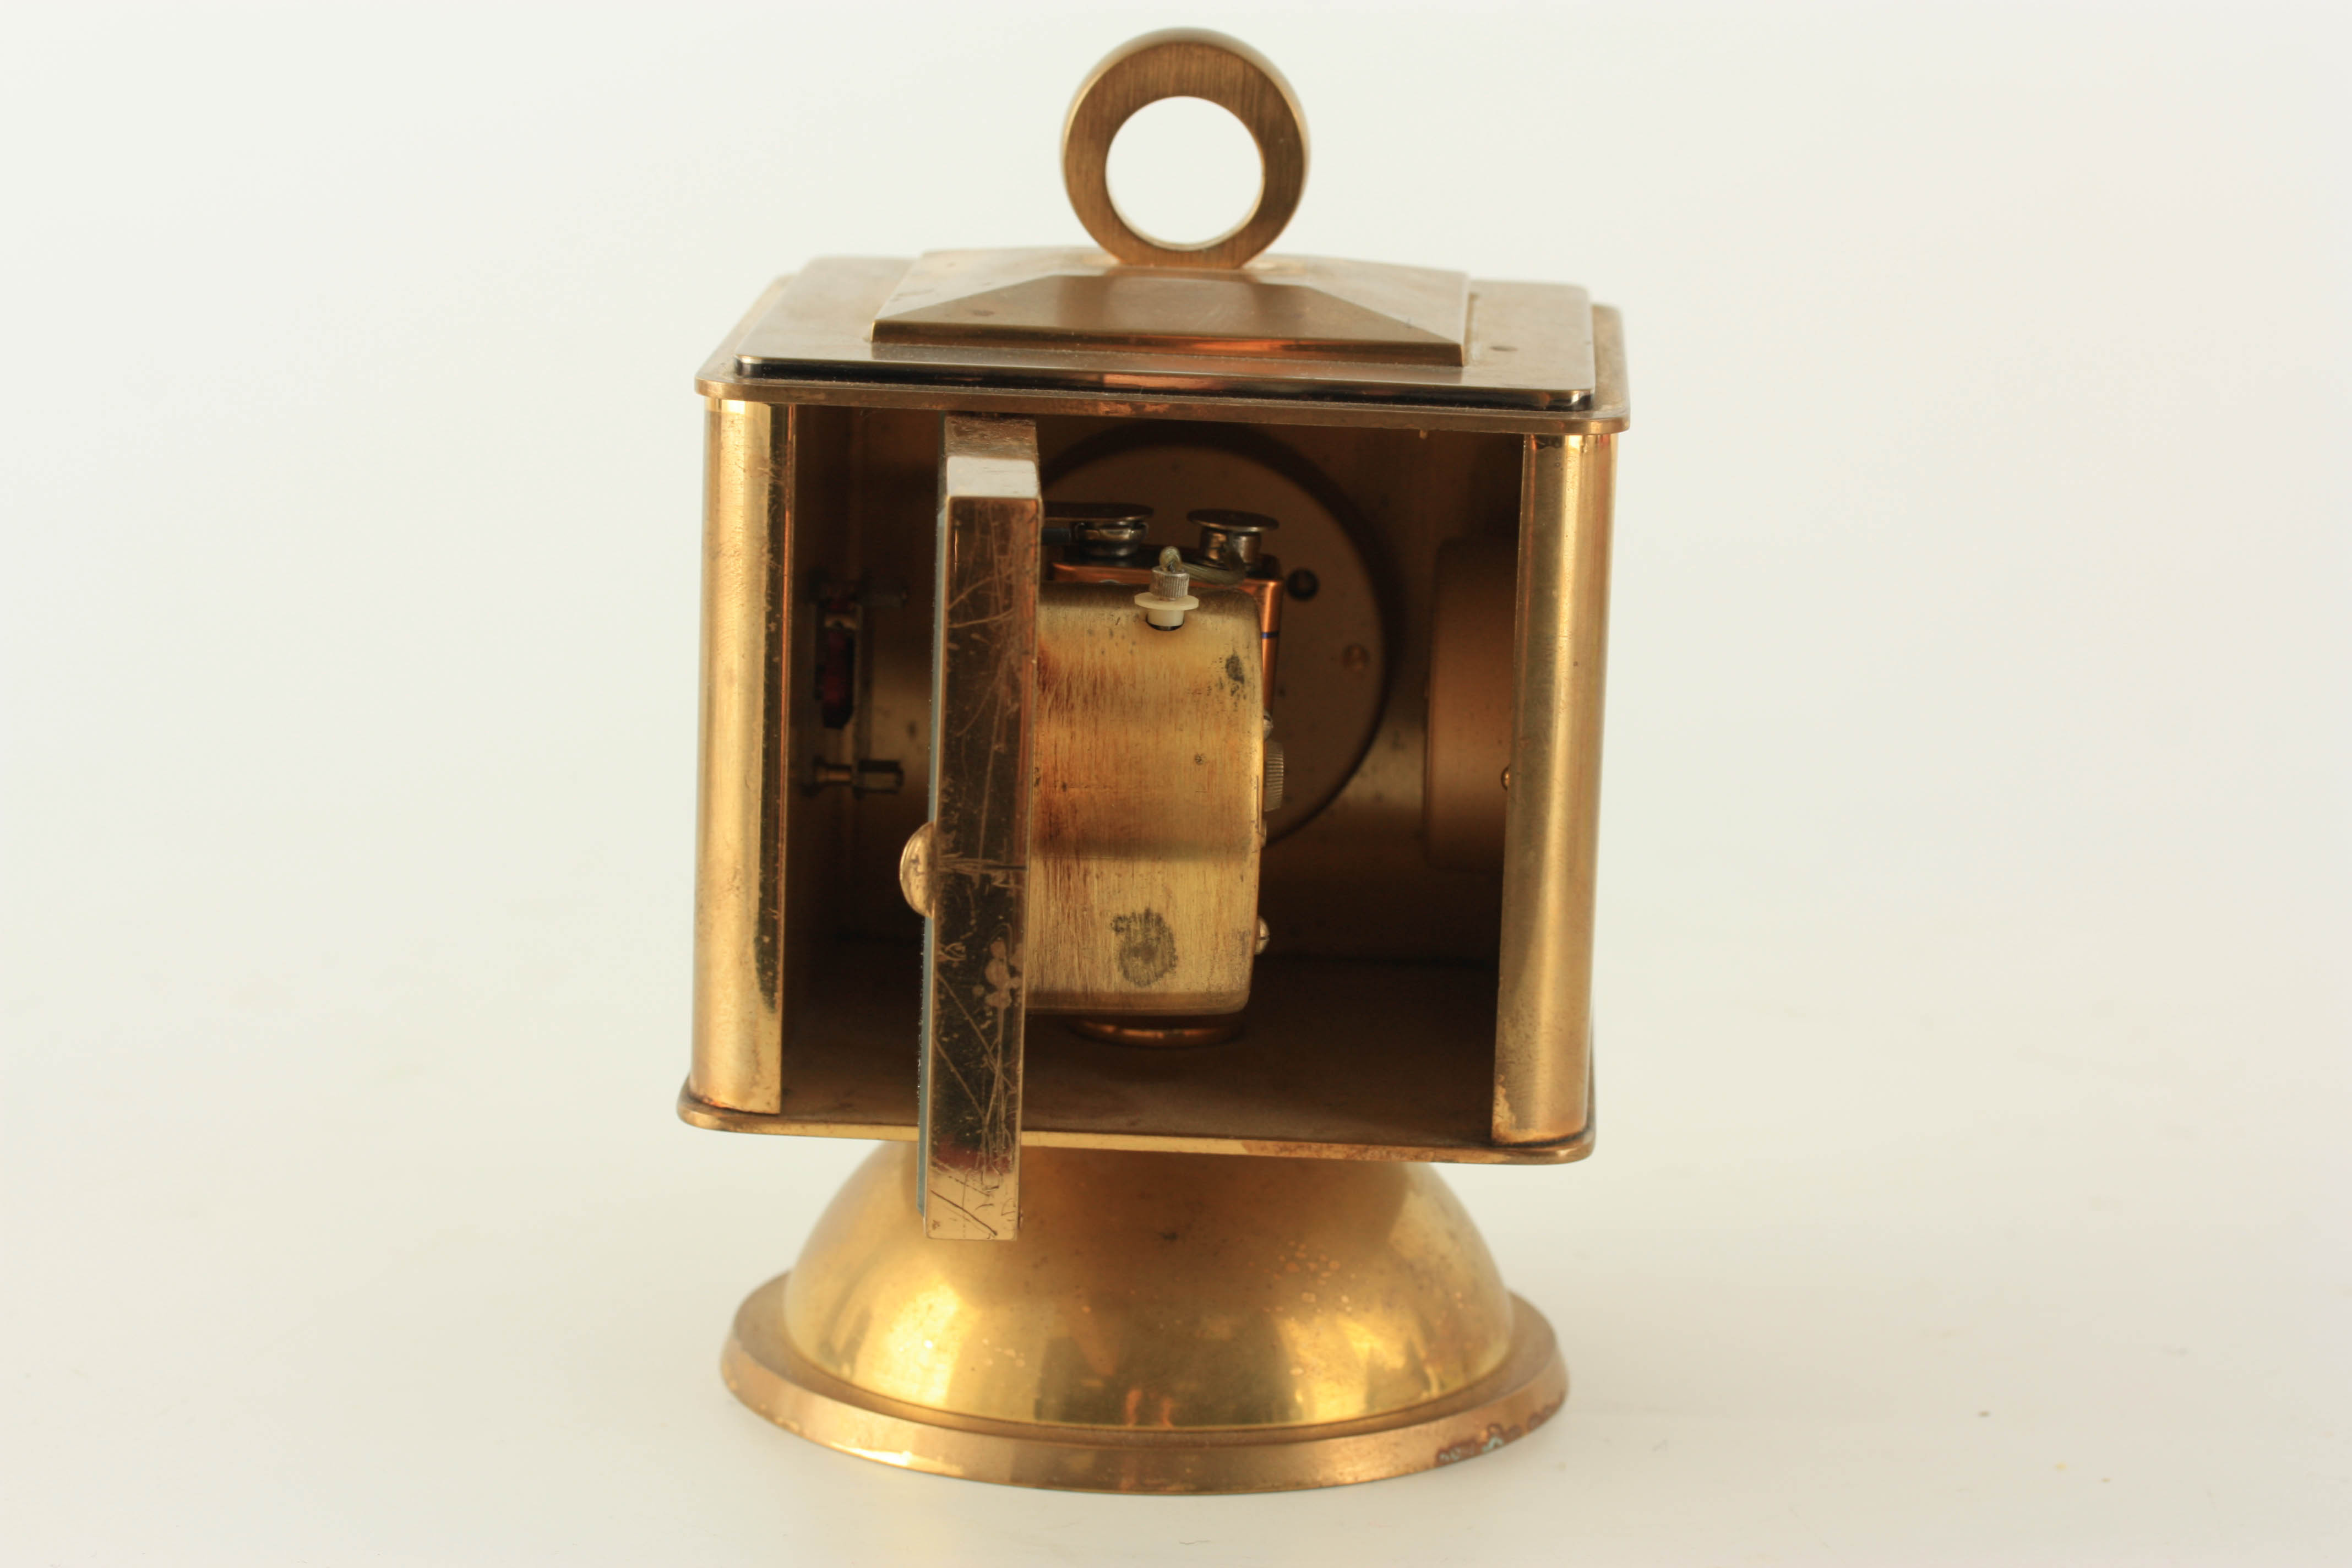 A LANCEL, 1950's SWISS GILT BRASS PORTABLE DESK CLOCK/WEATHER STATION the revolving cube body with - Image 5 of 6